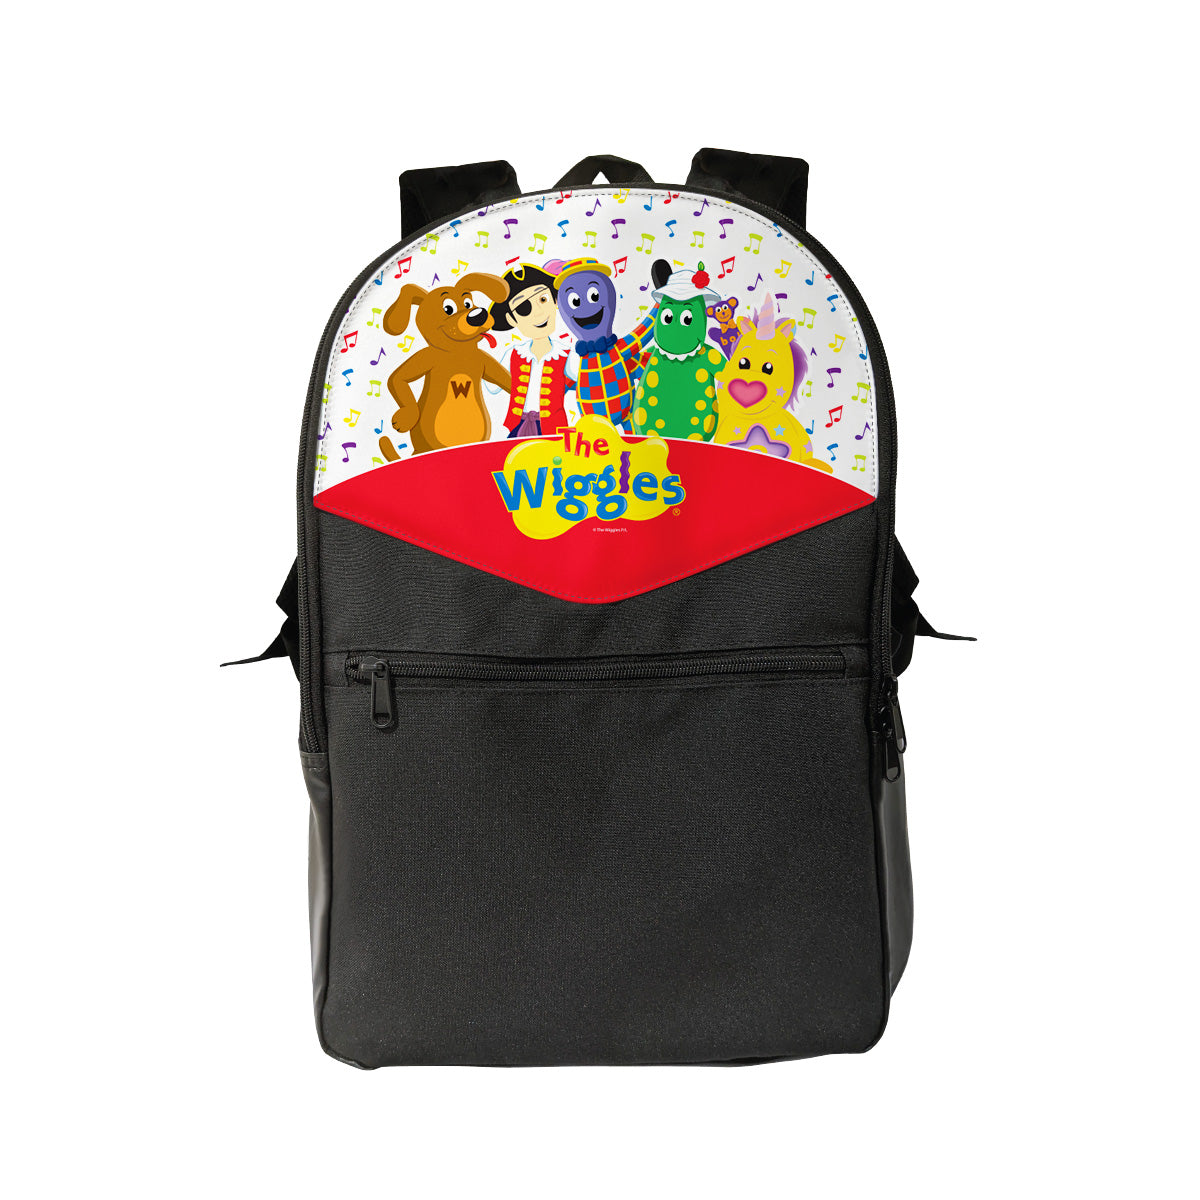 The Wiggles Friends Backpack